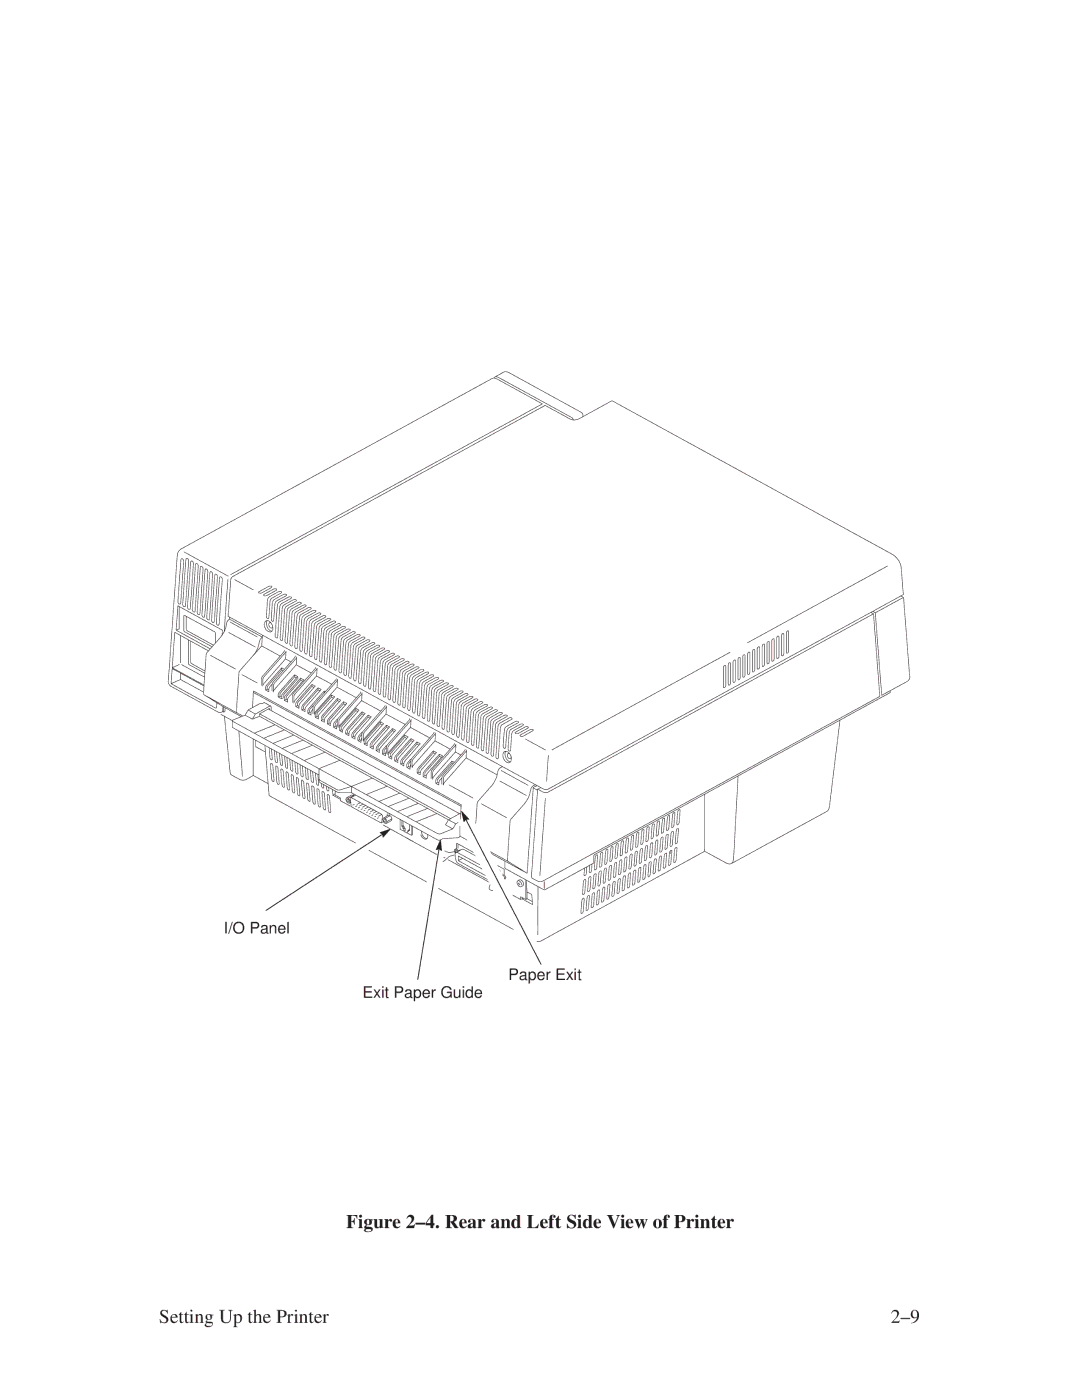 Printronix L1024 manual ±4. Rear and Left Side View of Printer 